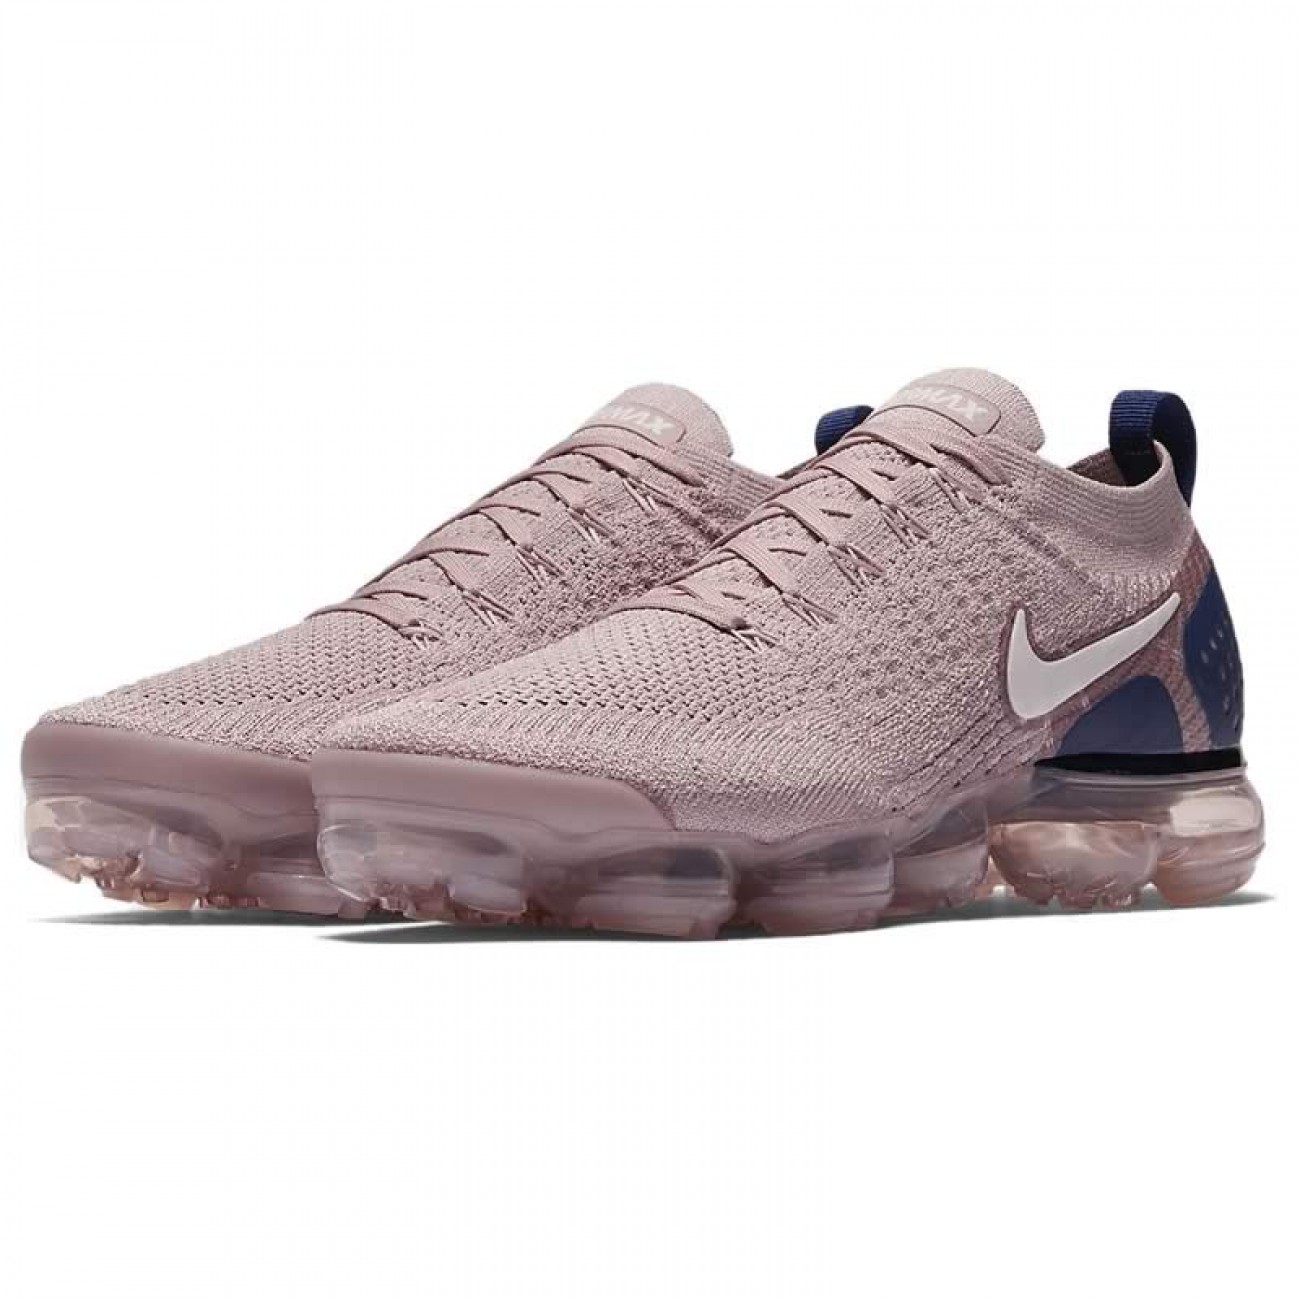 Nike Air Vapormax Flyknit 2.0 Taupe Blue Shoes 942842-201